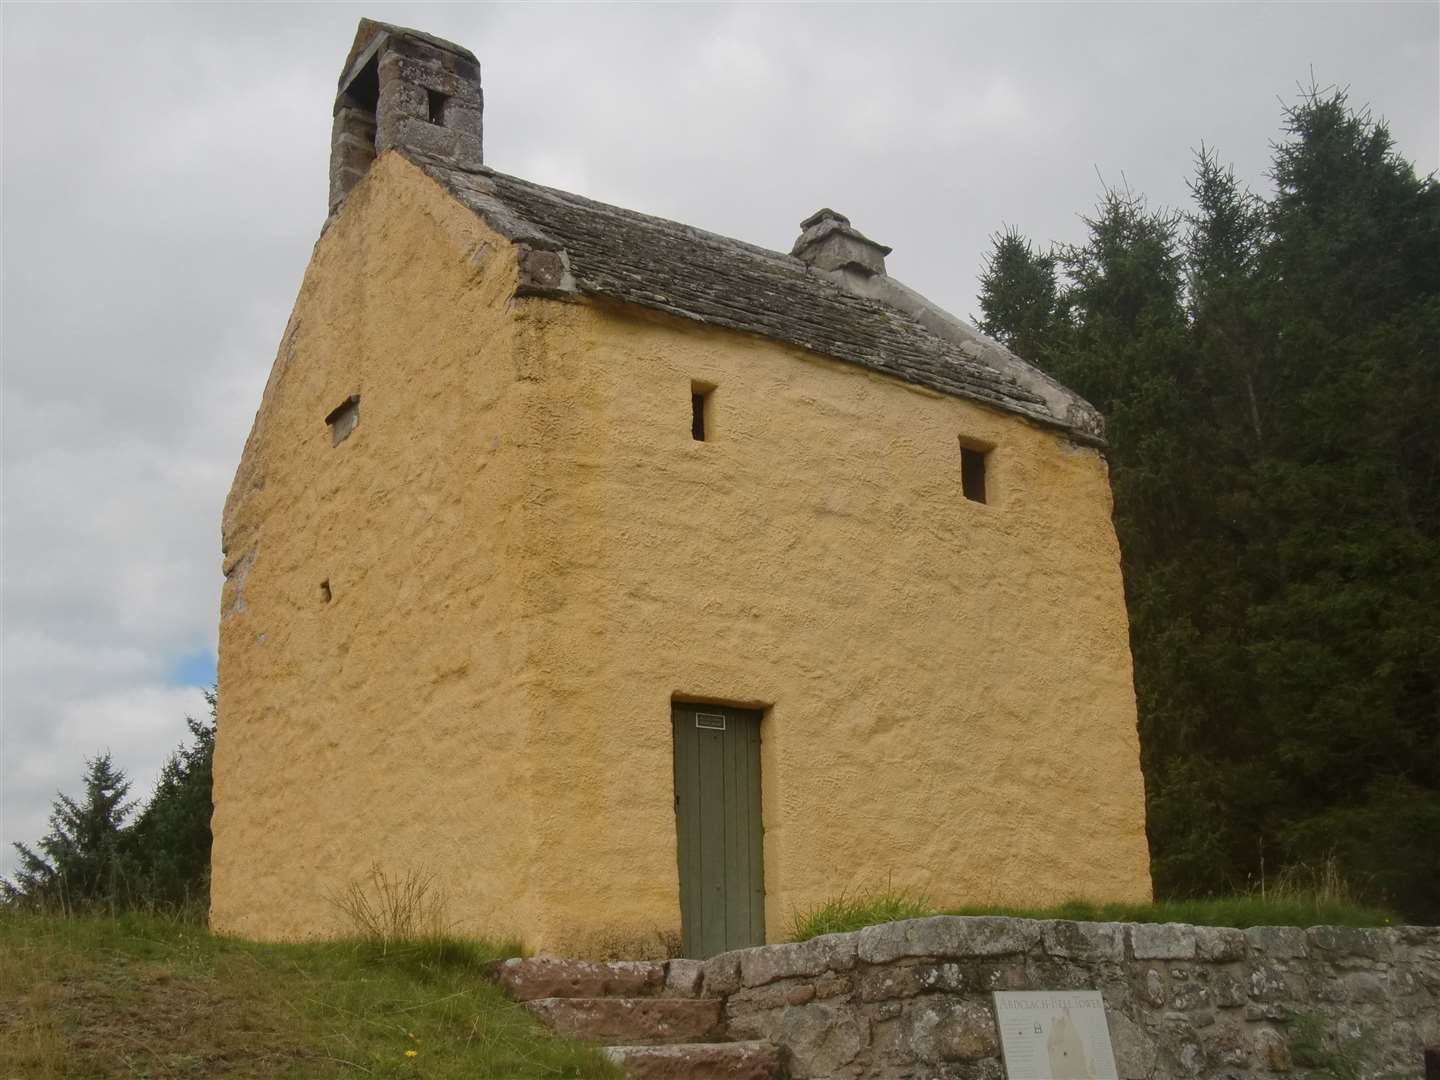 Ardclach Bell Tower dates from the 17th century.